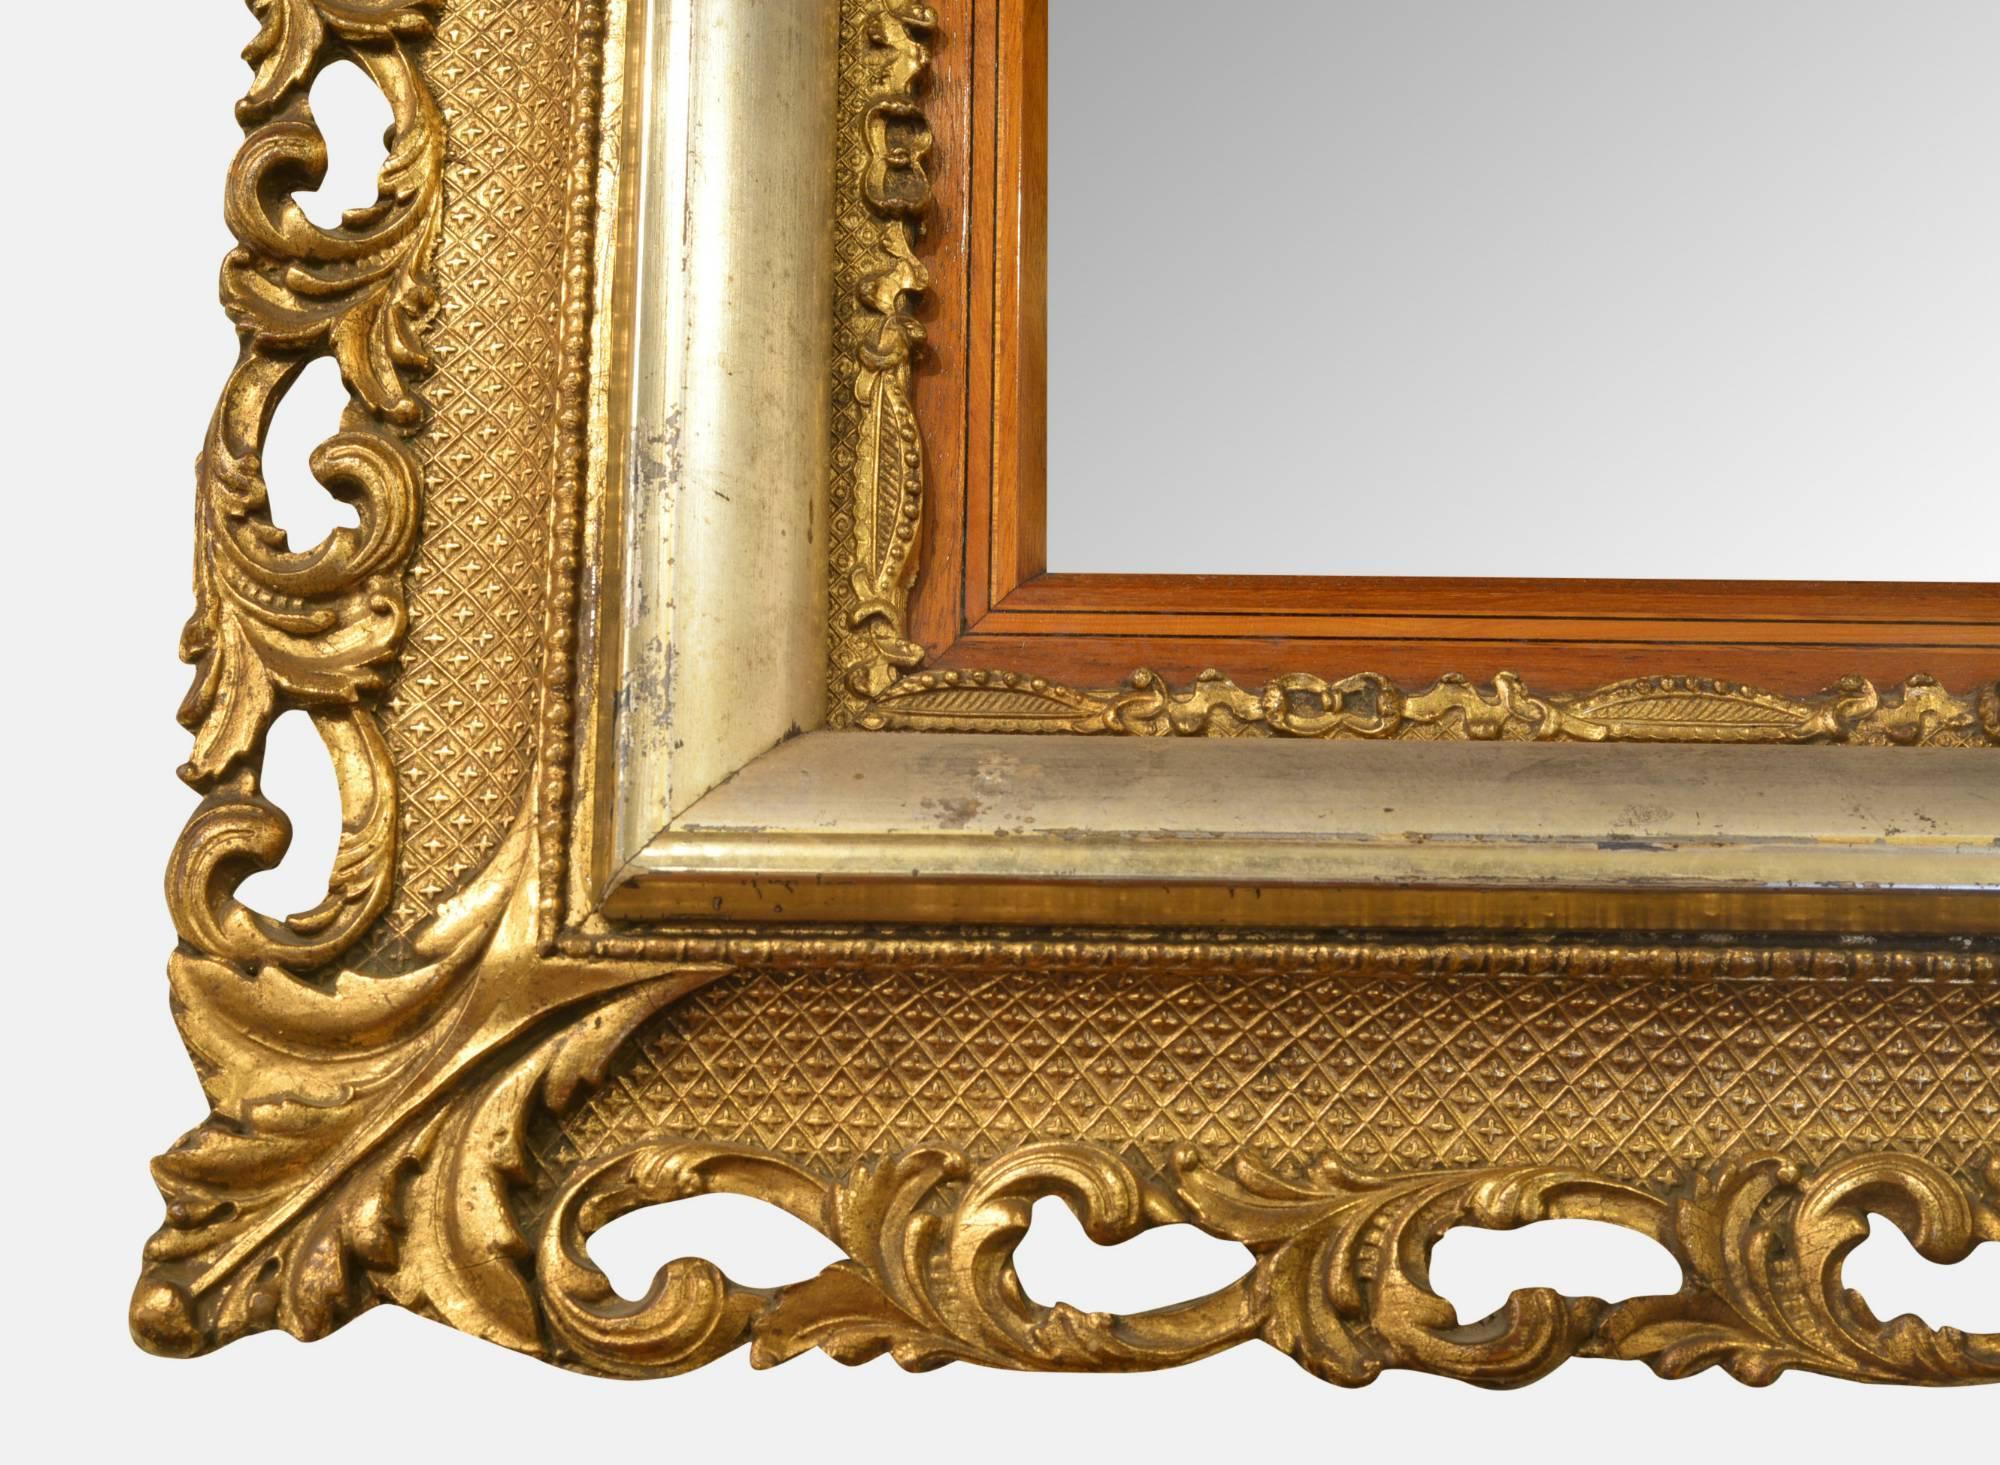 Ornate Victorian gilt framed mirror with bevel edged glass and just the right amount of foxing!